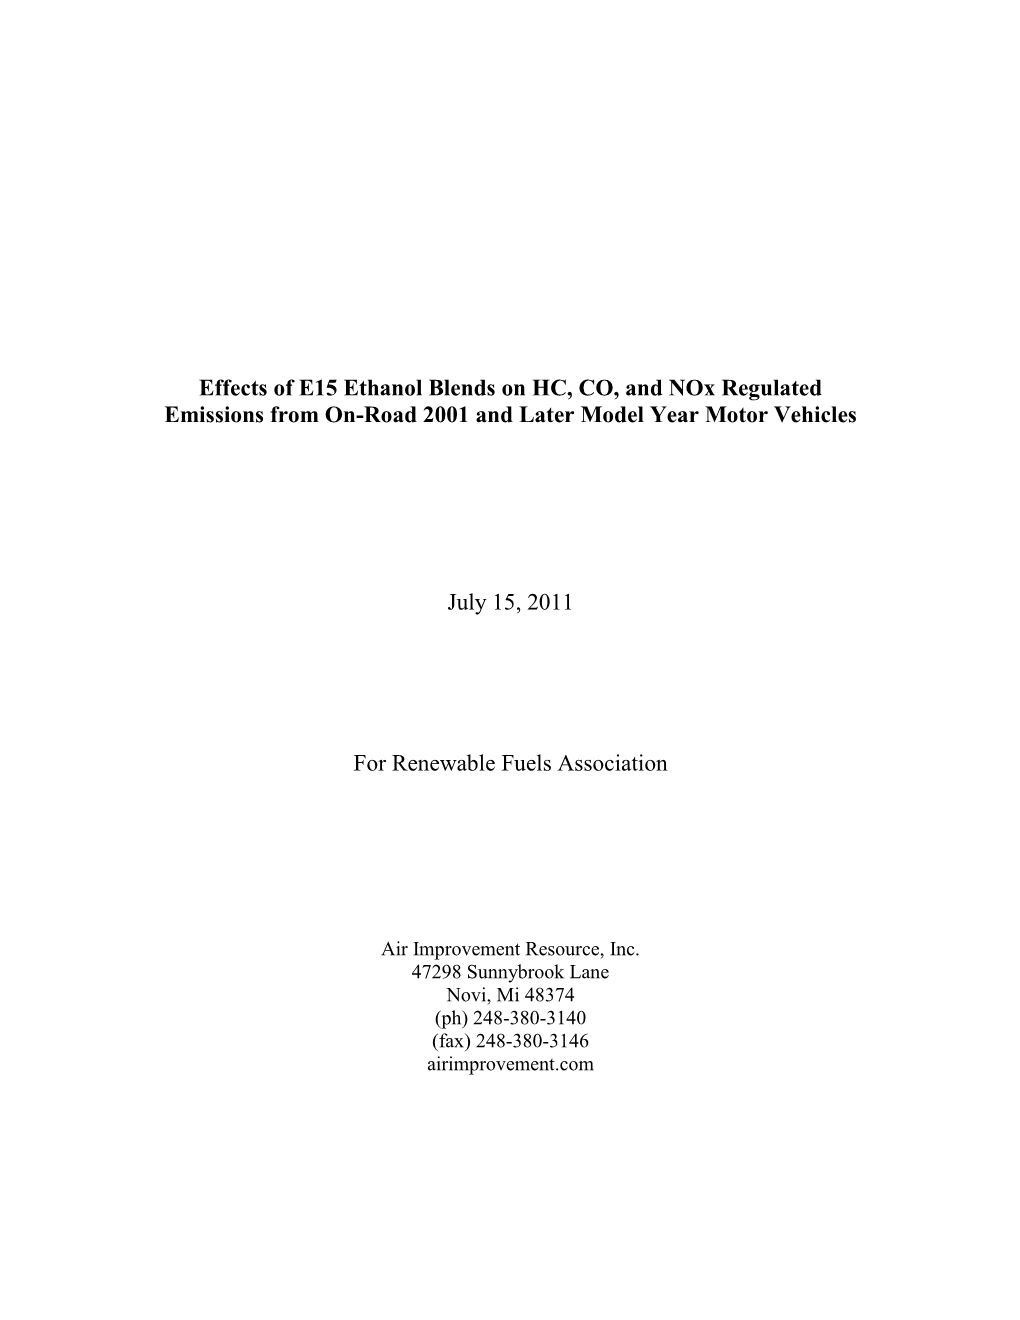 Effects of E15 Ethanol Blends on Emissions From